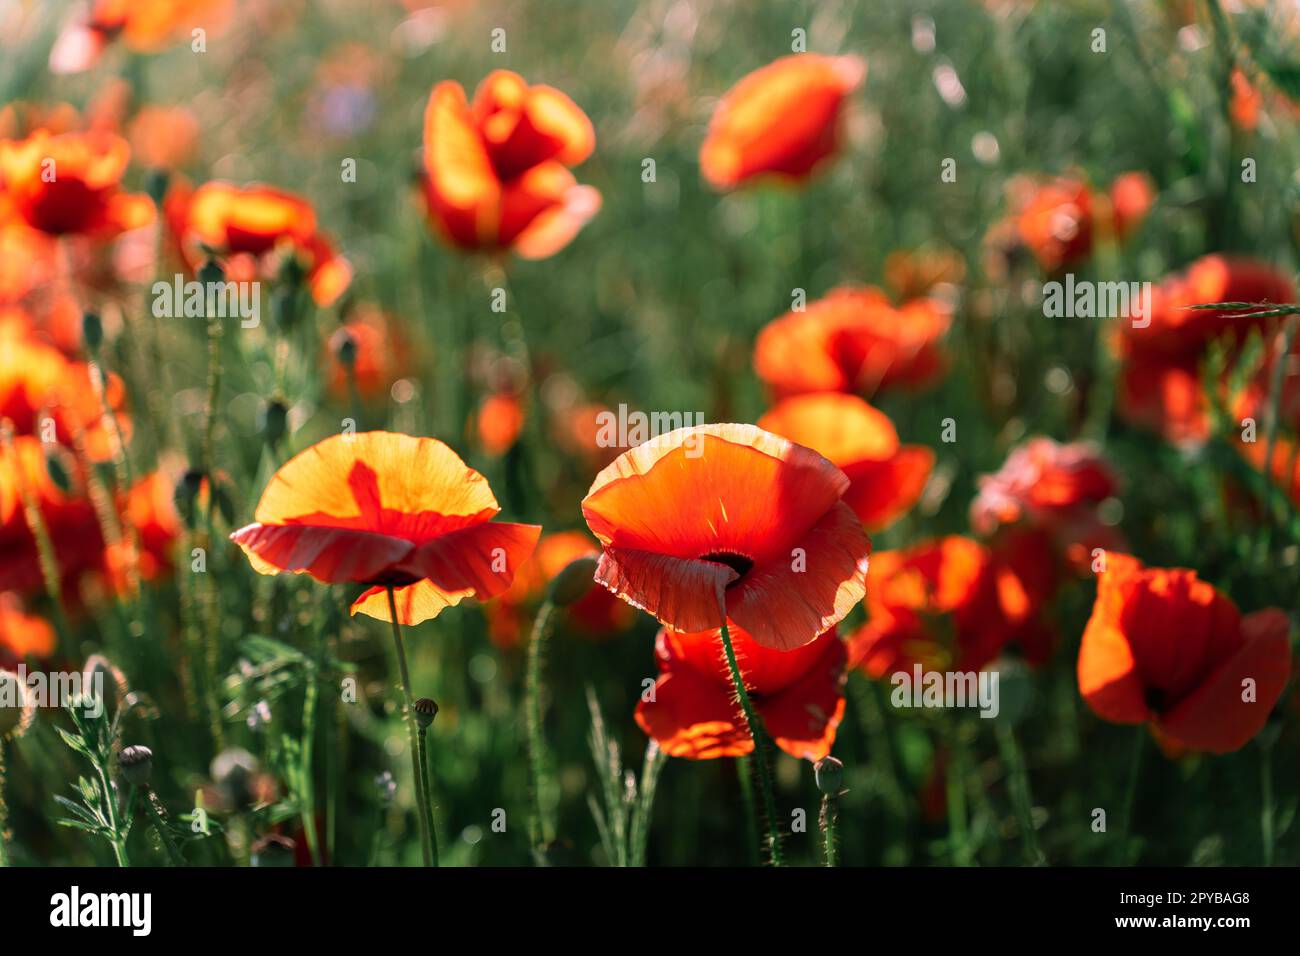 Meadow pf Papaver rhoeas, with other names common poppy,corn poppy, corn rose, field poppy, and red poppy Stock Photo